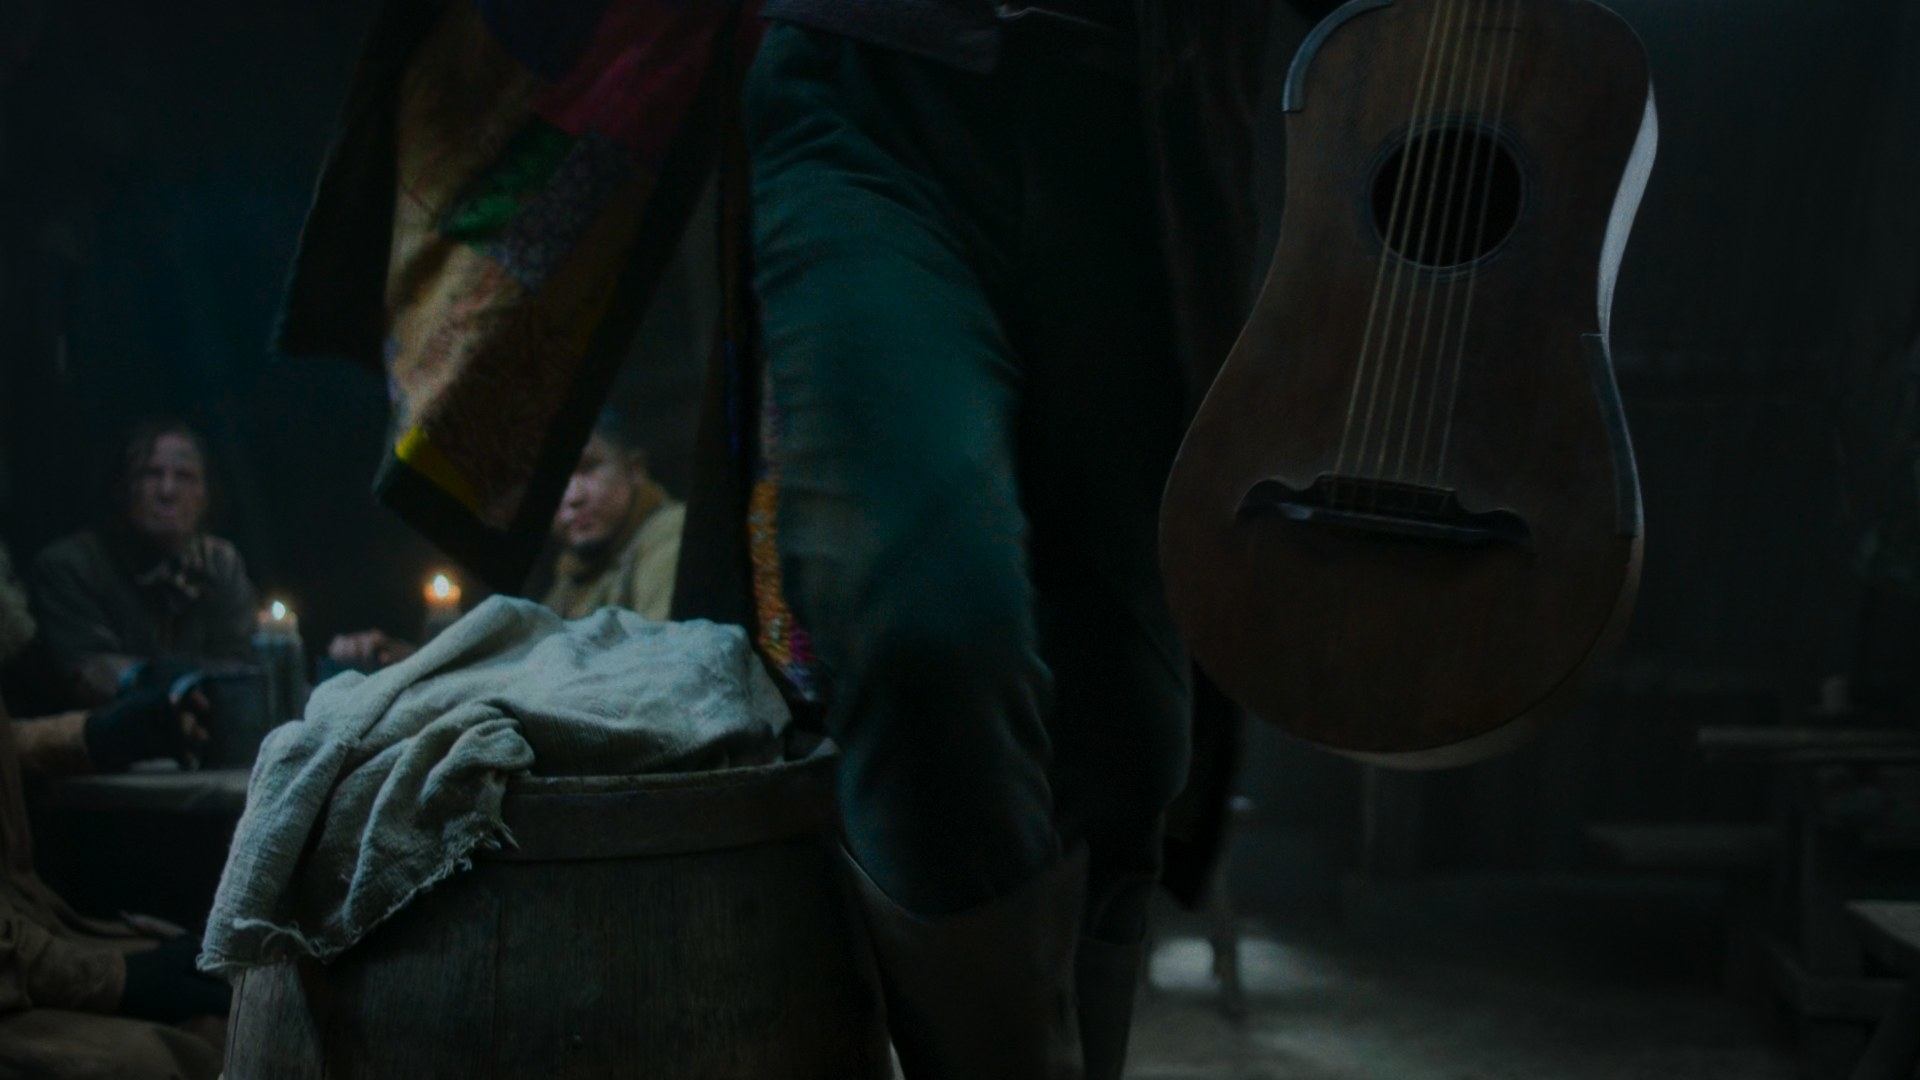 A shot of Thom Merrilin’s (Alexandre Willaume) lower body as he picks up a wooden guitar and sits on a propped-up barrel. On the inside of his coat are a number of colourful patches.